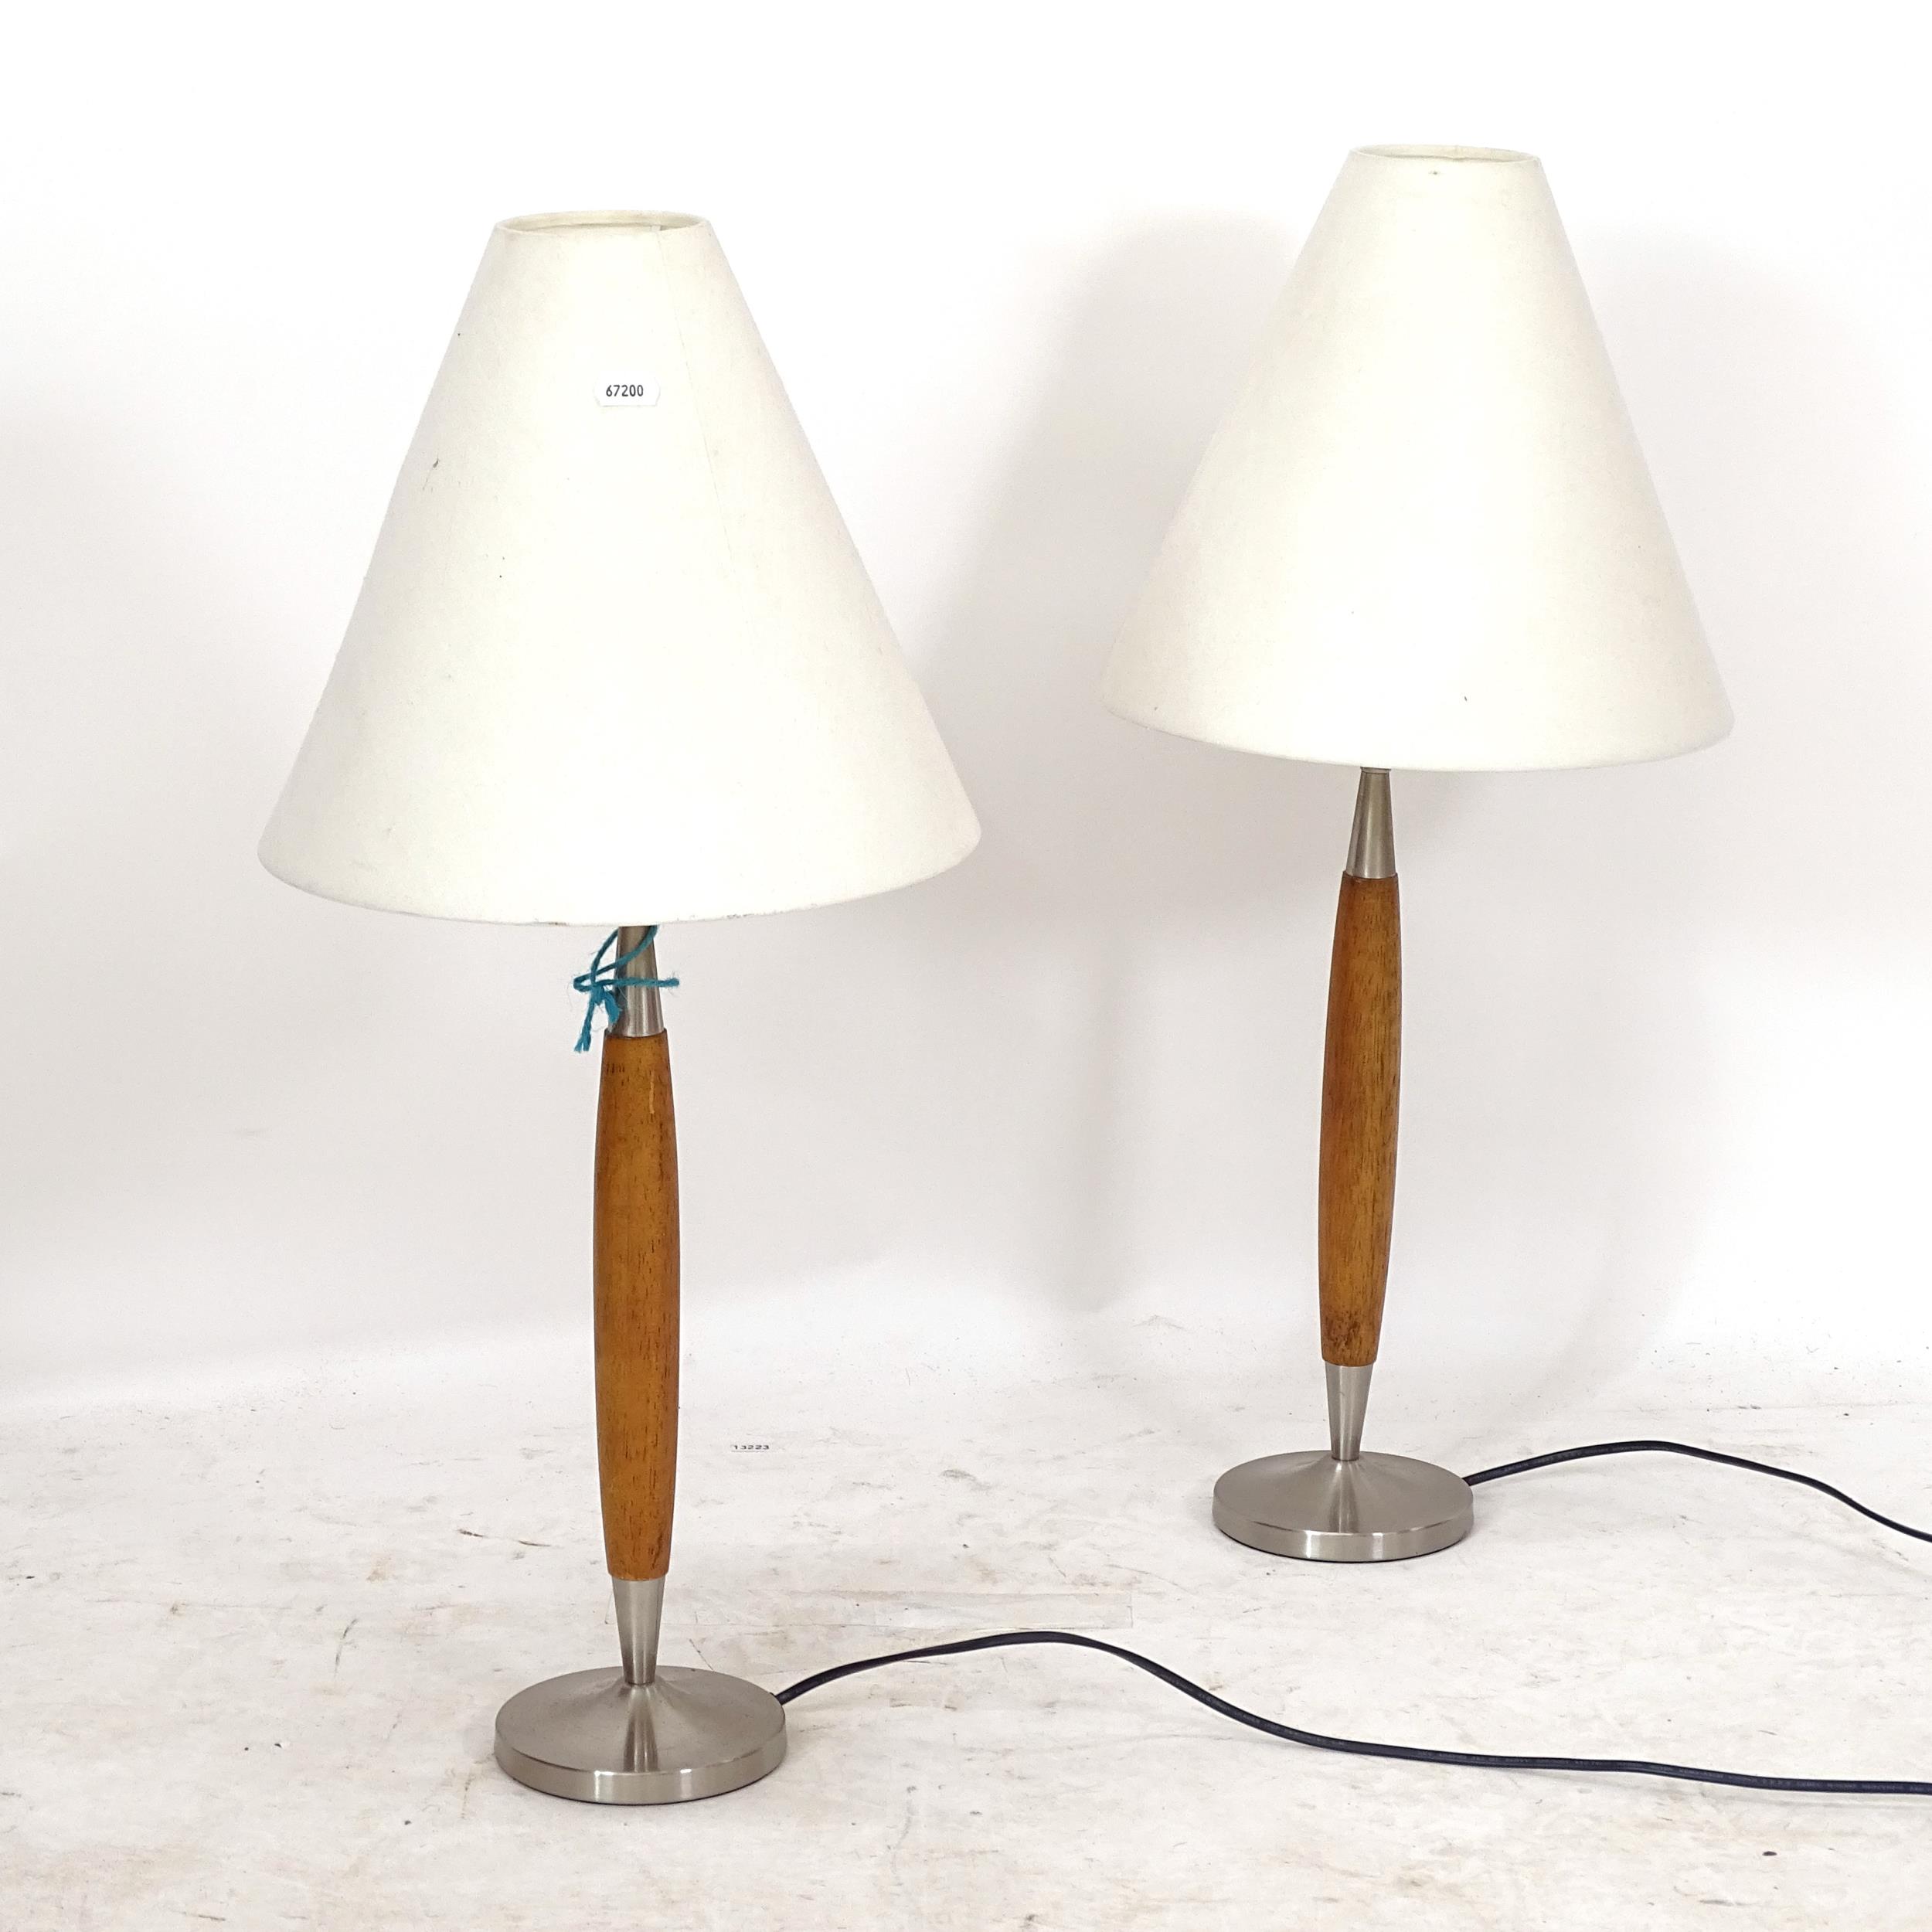 A pair of mid-century style table lamps, height including shade 66cm